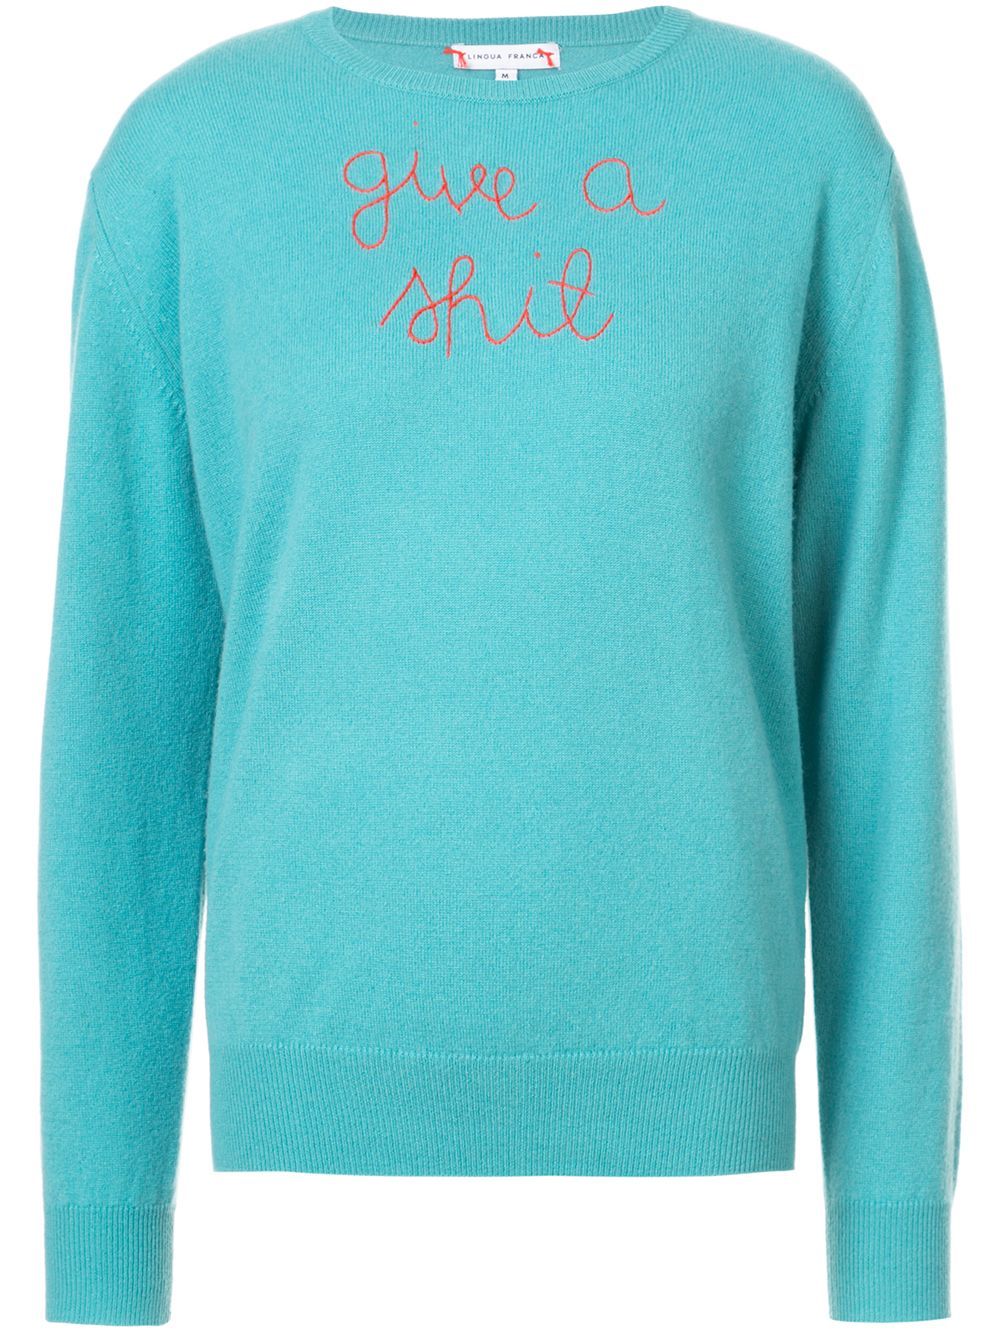 Lingua Franca quote embroidered sweater - Blue | FarFetch US